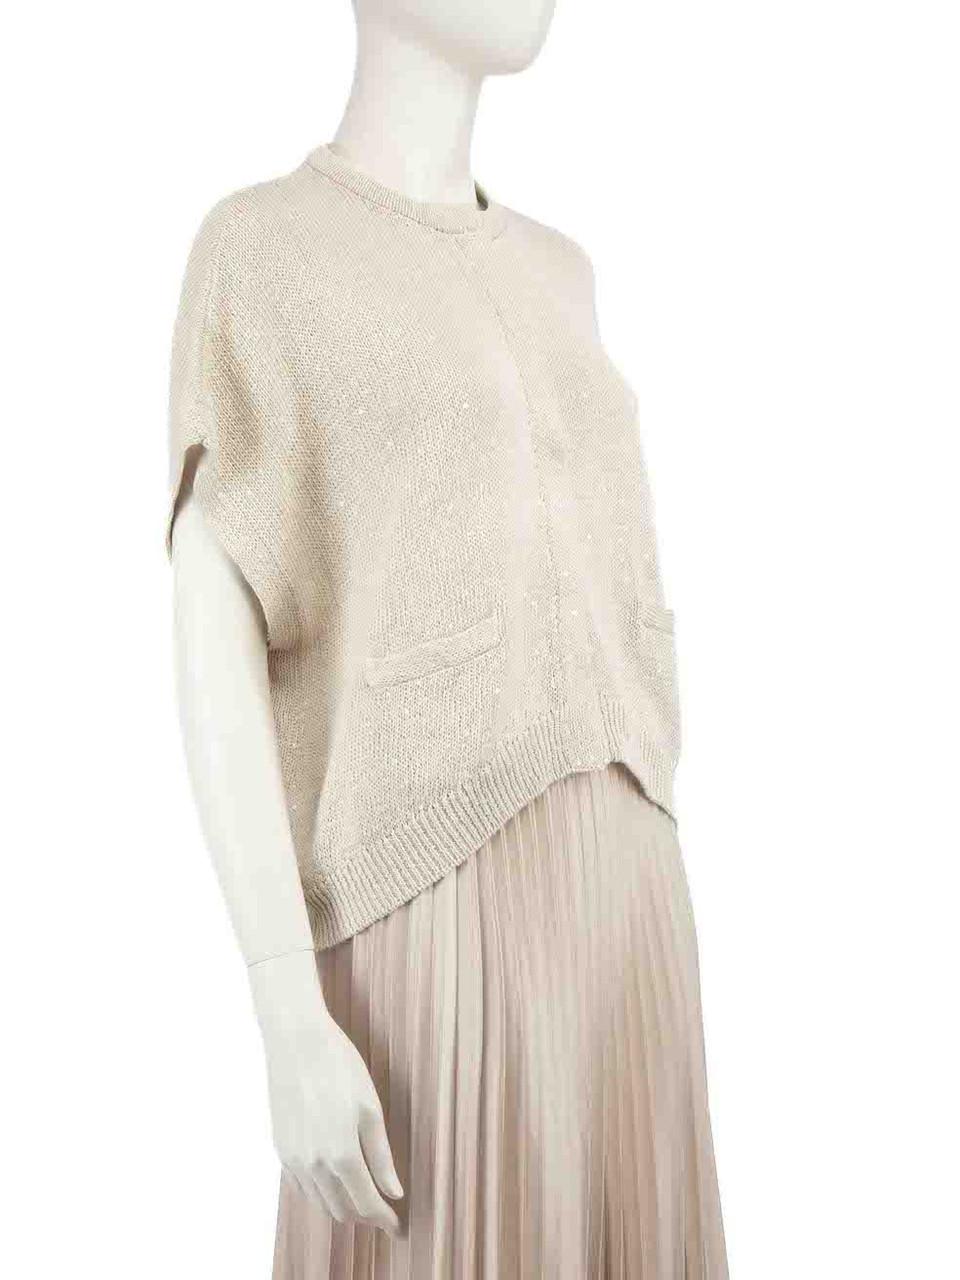 CONDITION is Very good. Hardly any visible wear to cardigan is evident on this used Brunello Cucinelli designer resale item.
 
 
 
 Details
 
 
 Ecru
 
 Cotton
 
 Knit cardigan
 
 Round neck
 
 Short sleeves
 
 Sequin embellished
 
 Snap button